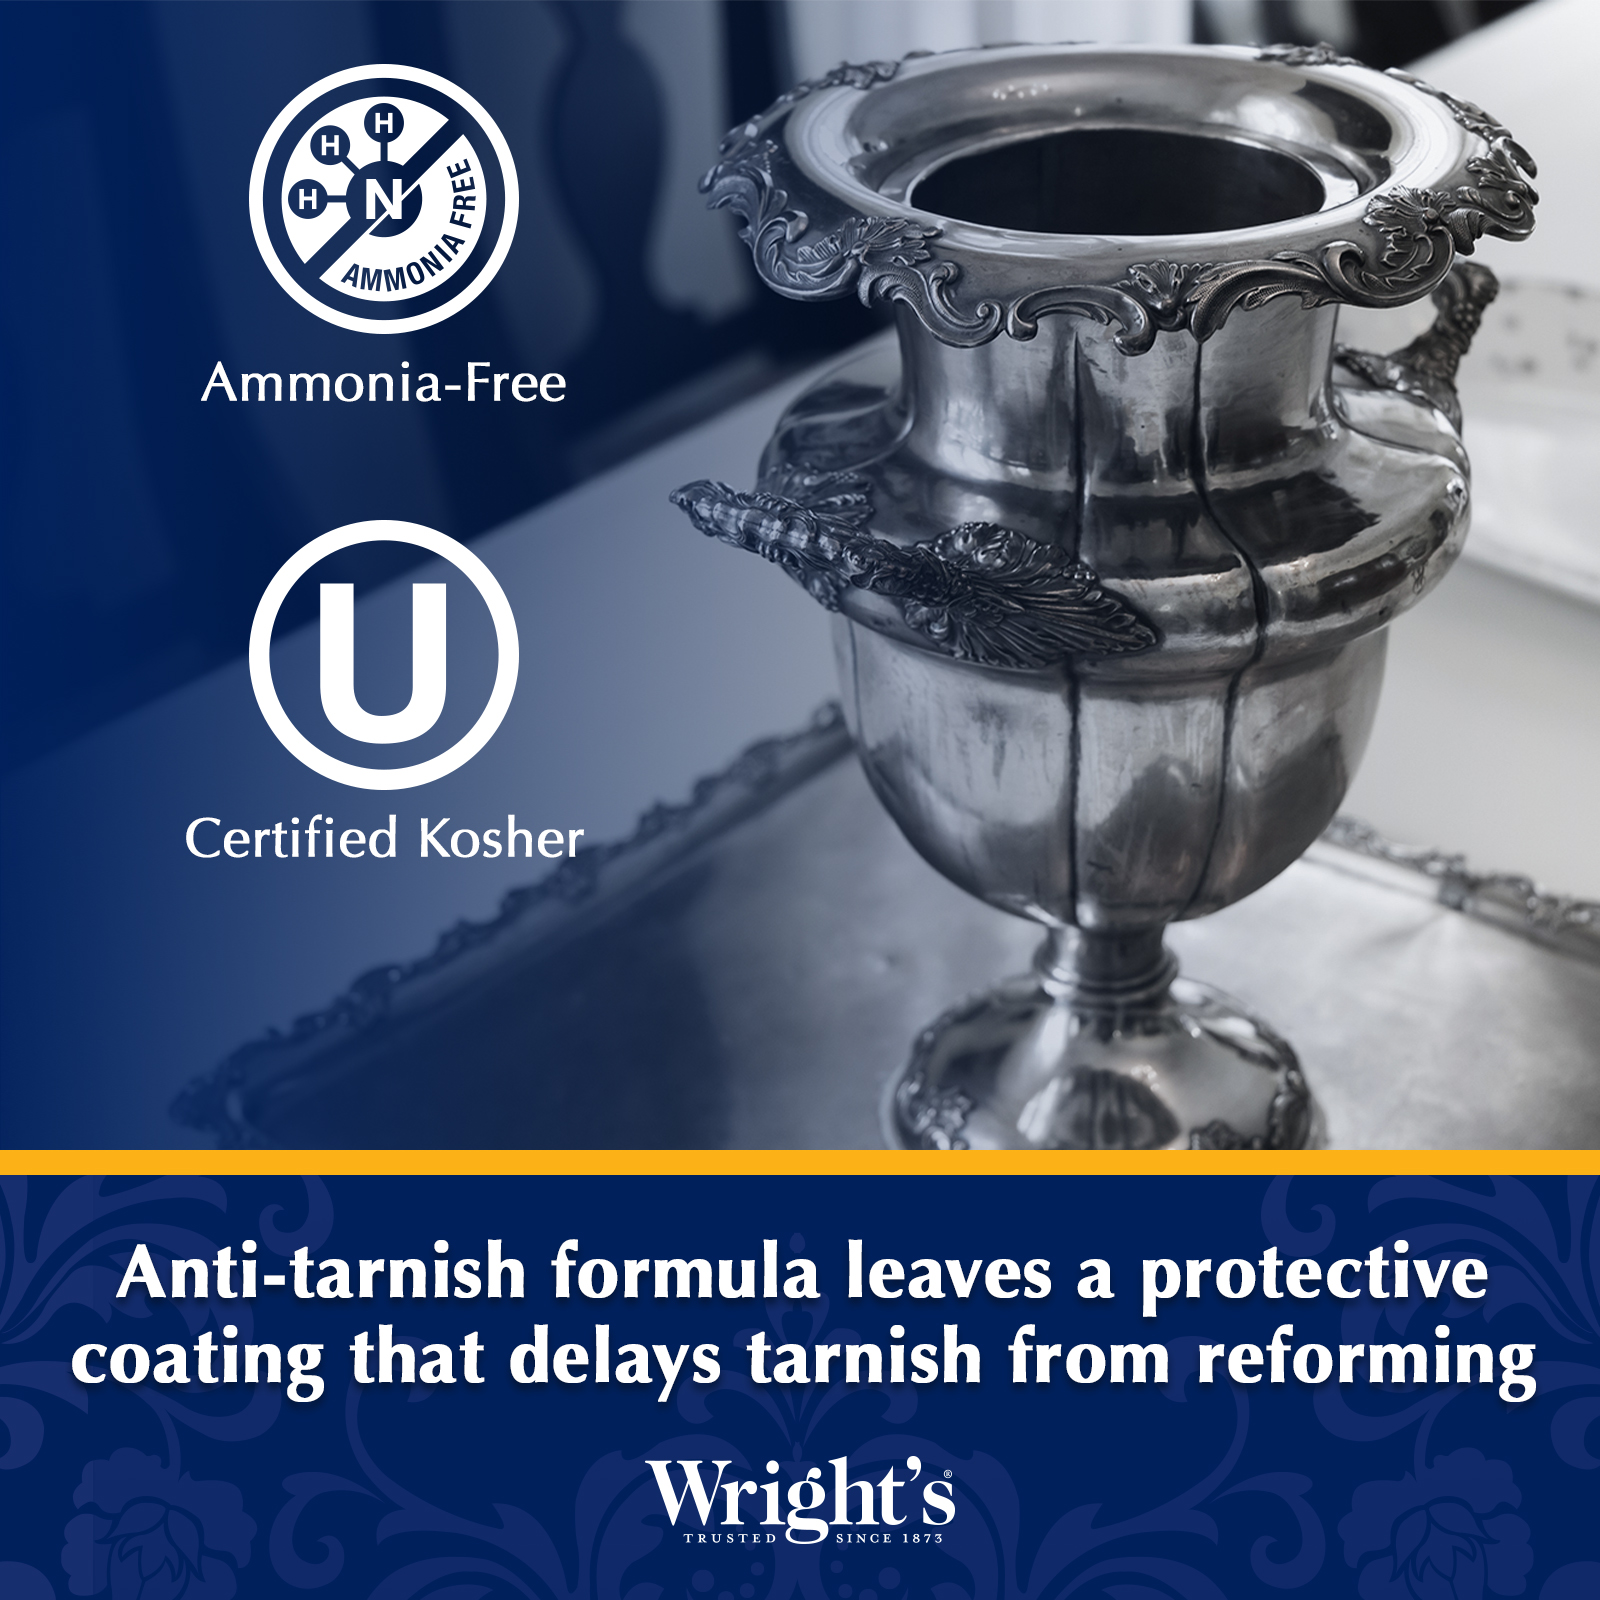 Wright's Silver and Metal Polish Cleaner - Removes Tarnish from Silver, 8 oz, Unscented - image 4 of 7